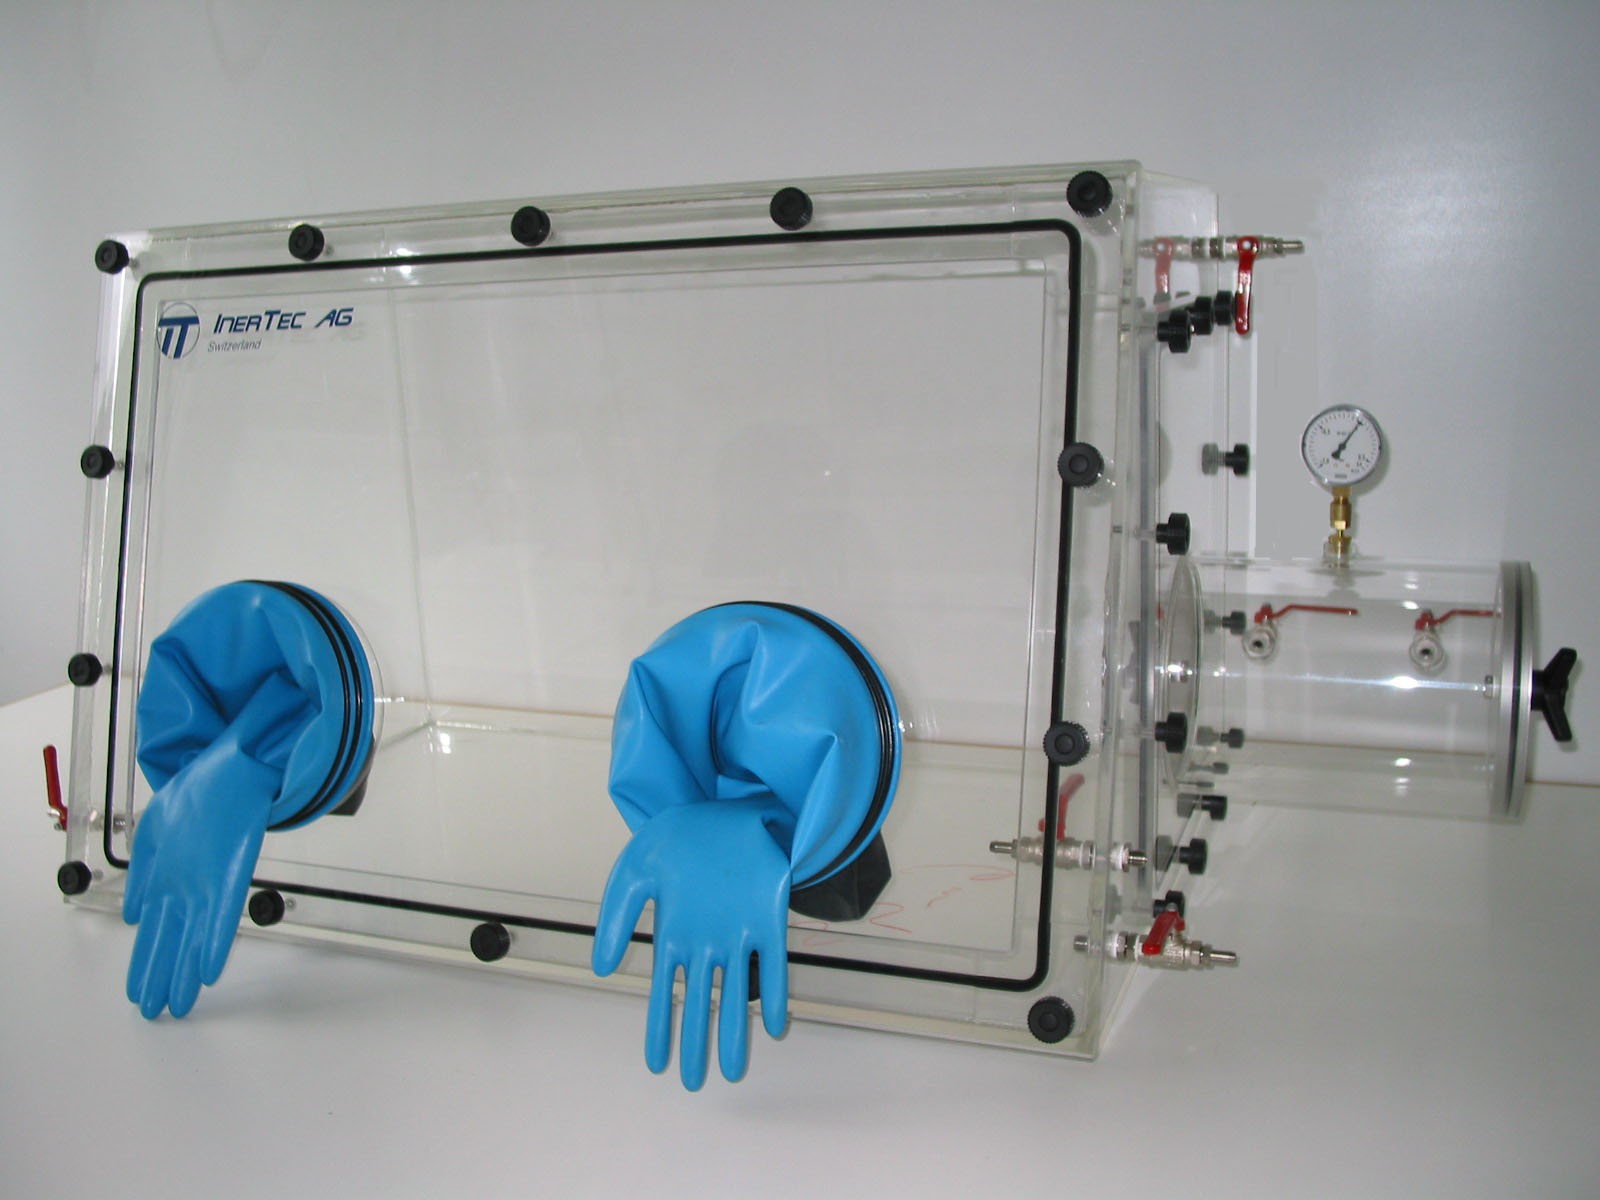 Glovebox made of acrylic&gt; Gas filling: by hand, front design: swivels upwards, side design: removable flange Control: oxygen and humidity display